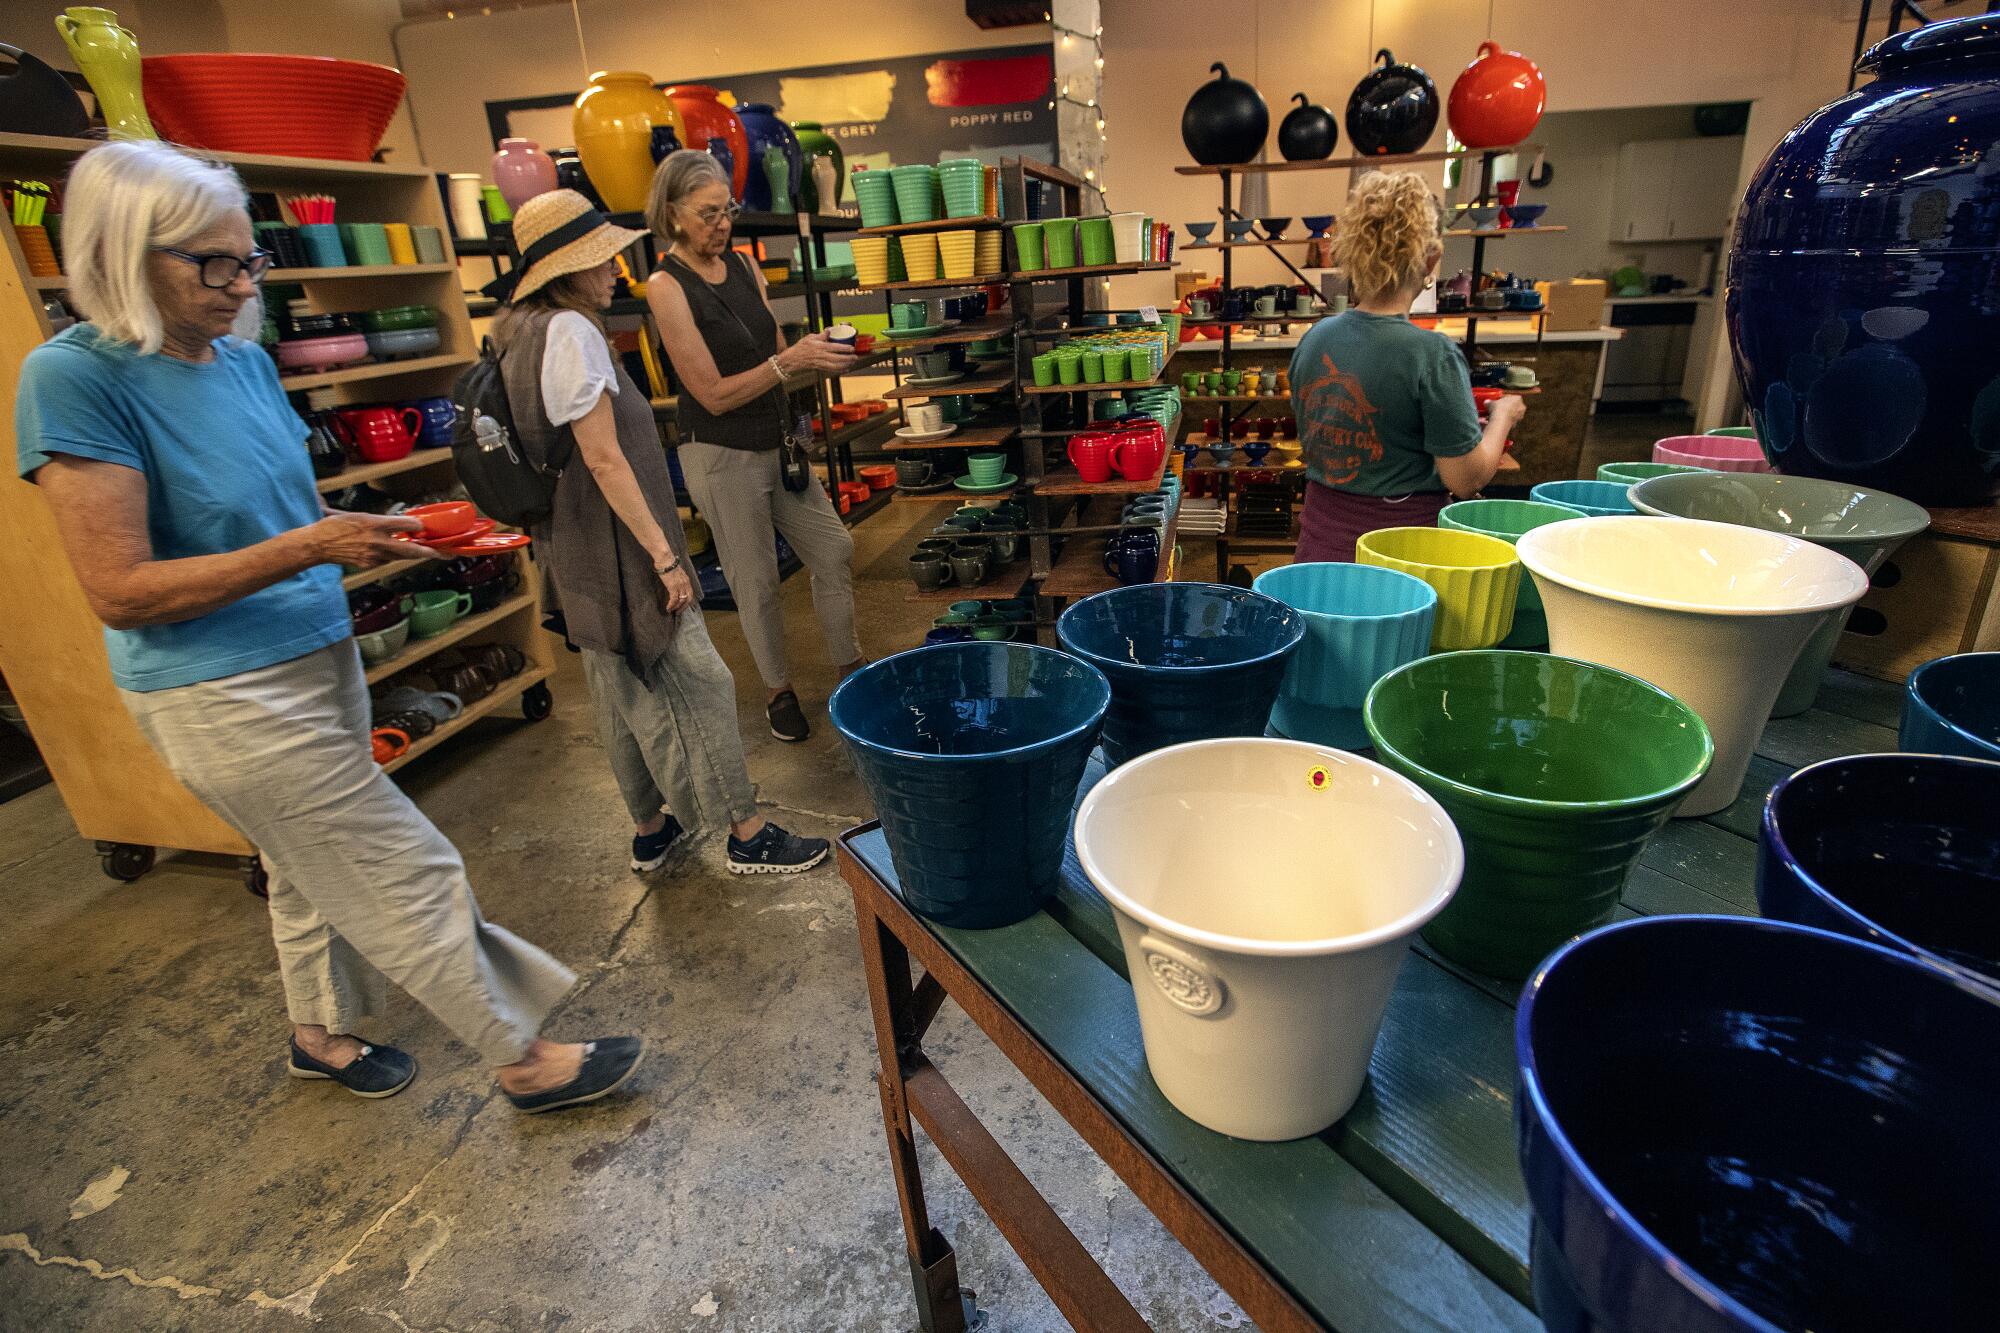 The Ceramic Shop - Discounted ceramic supplies for schools